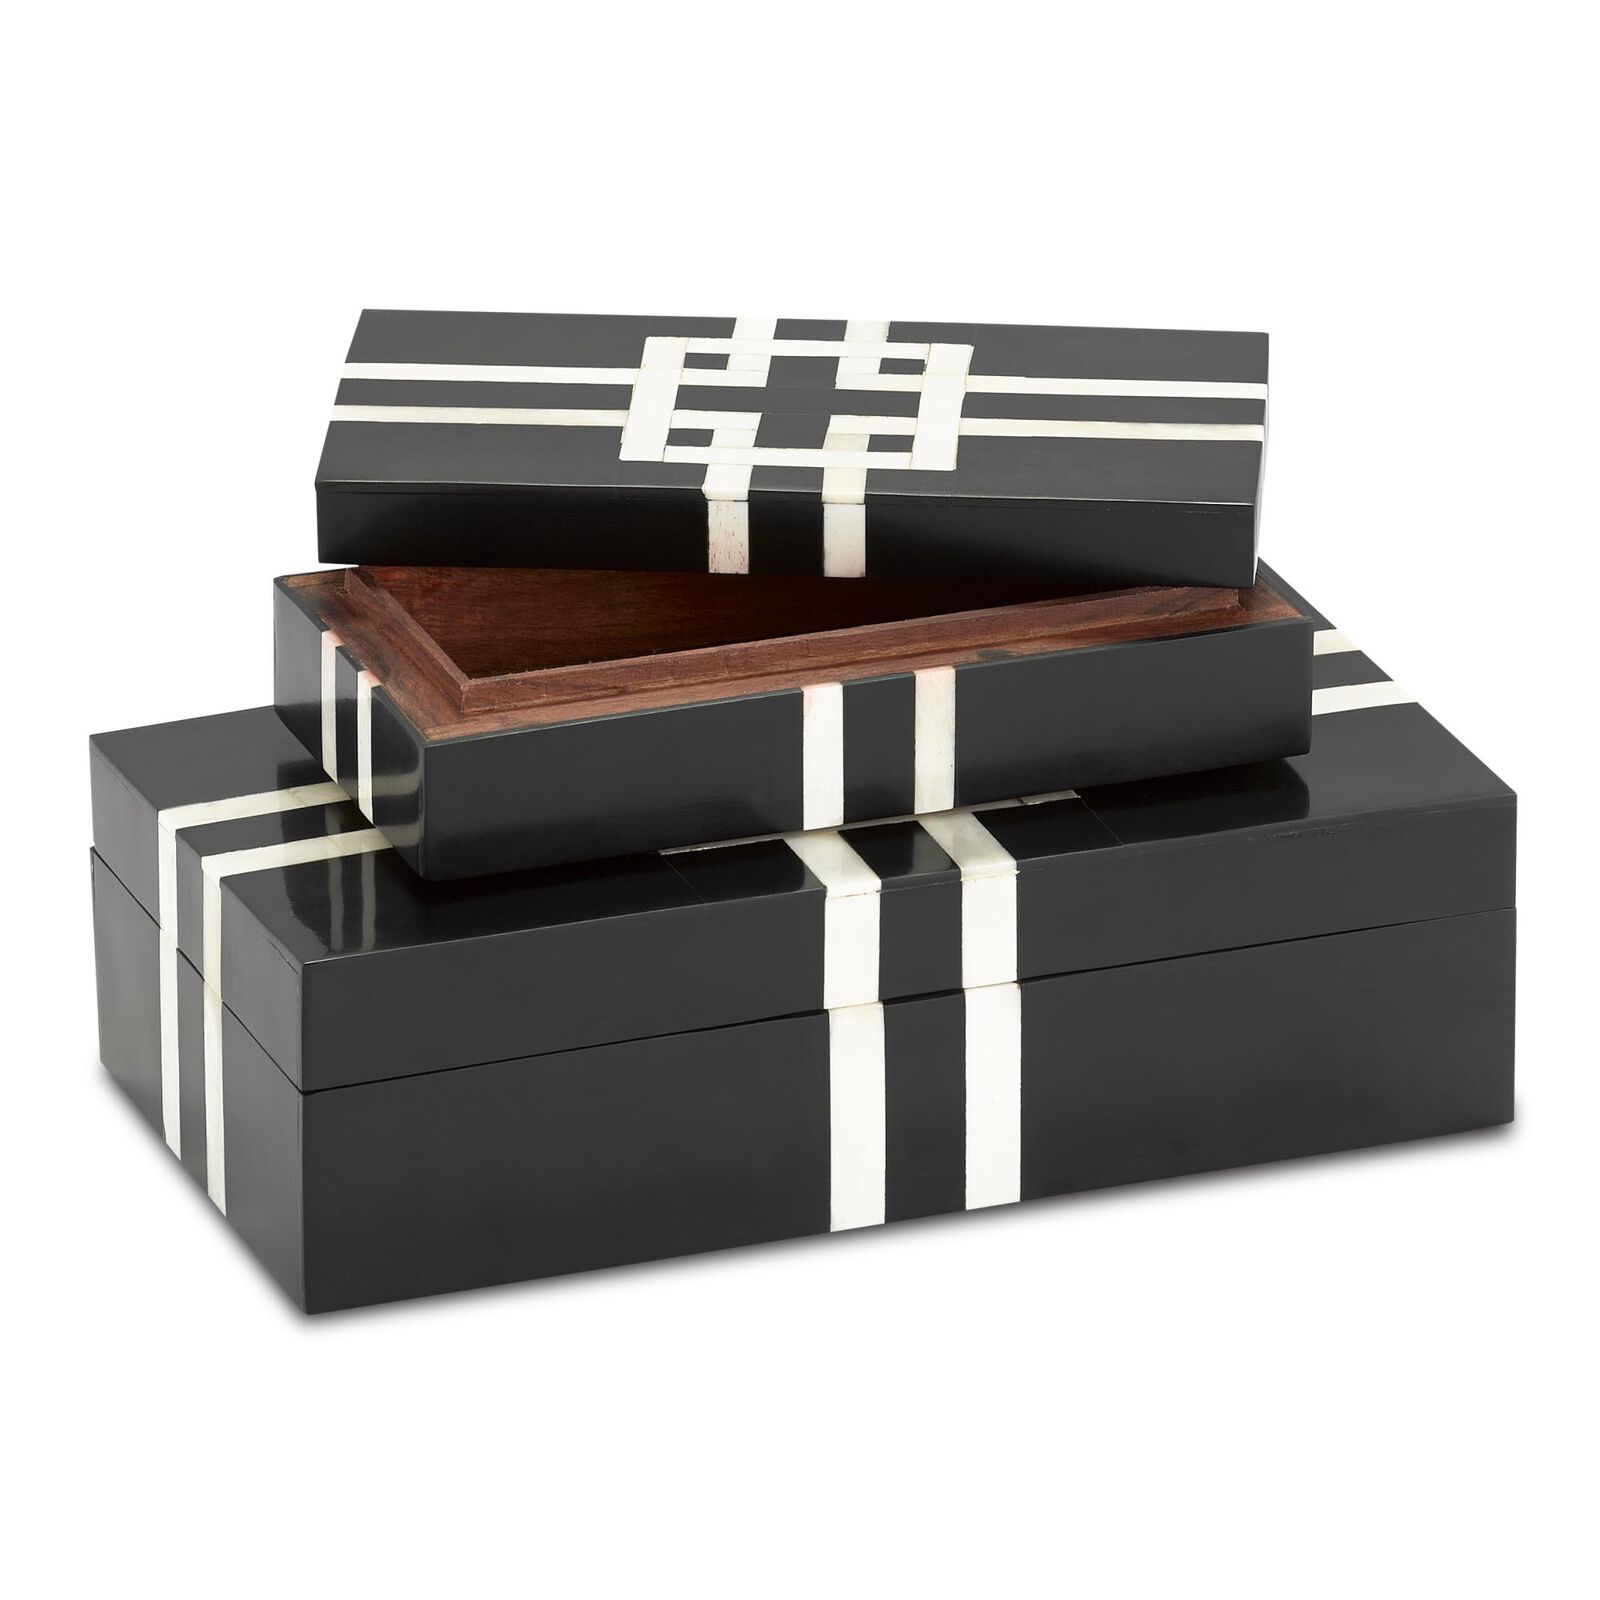 Black and White Lines Boxes Set of 2 Accent Box | Capitol Lighting